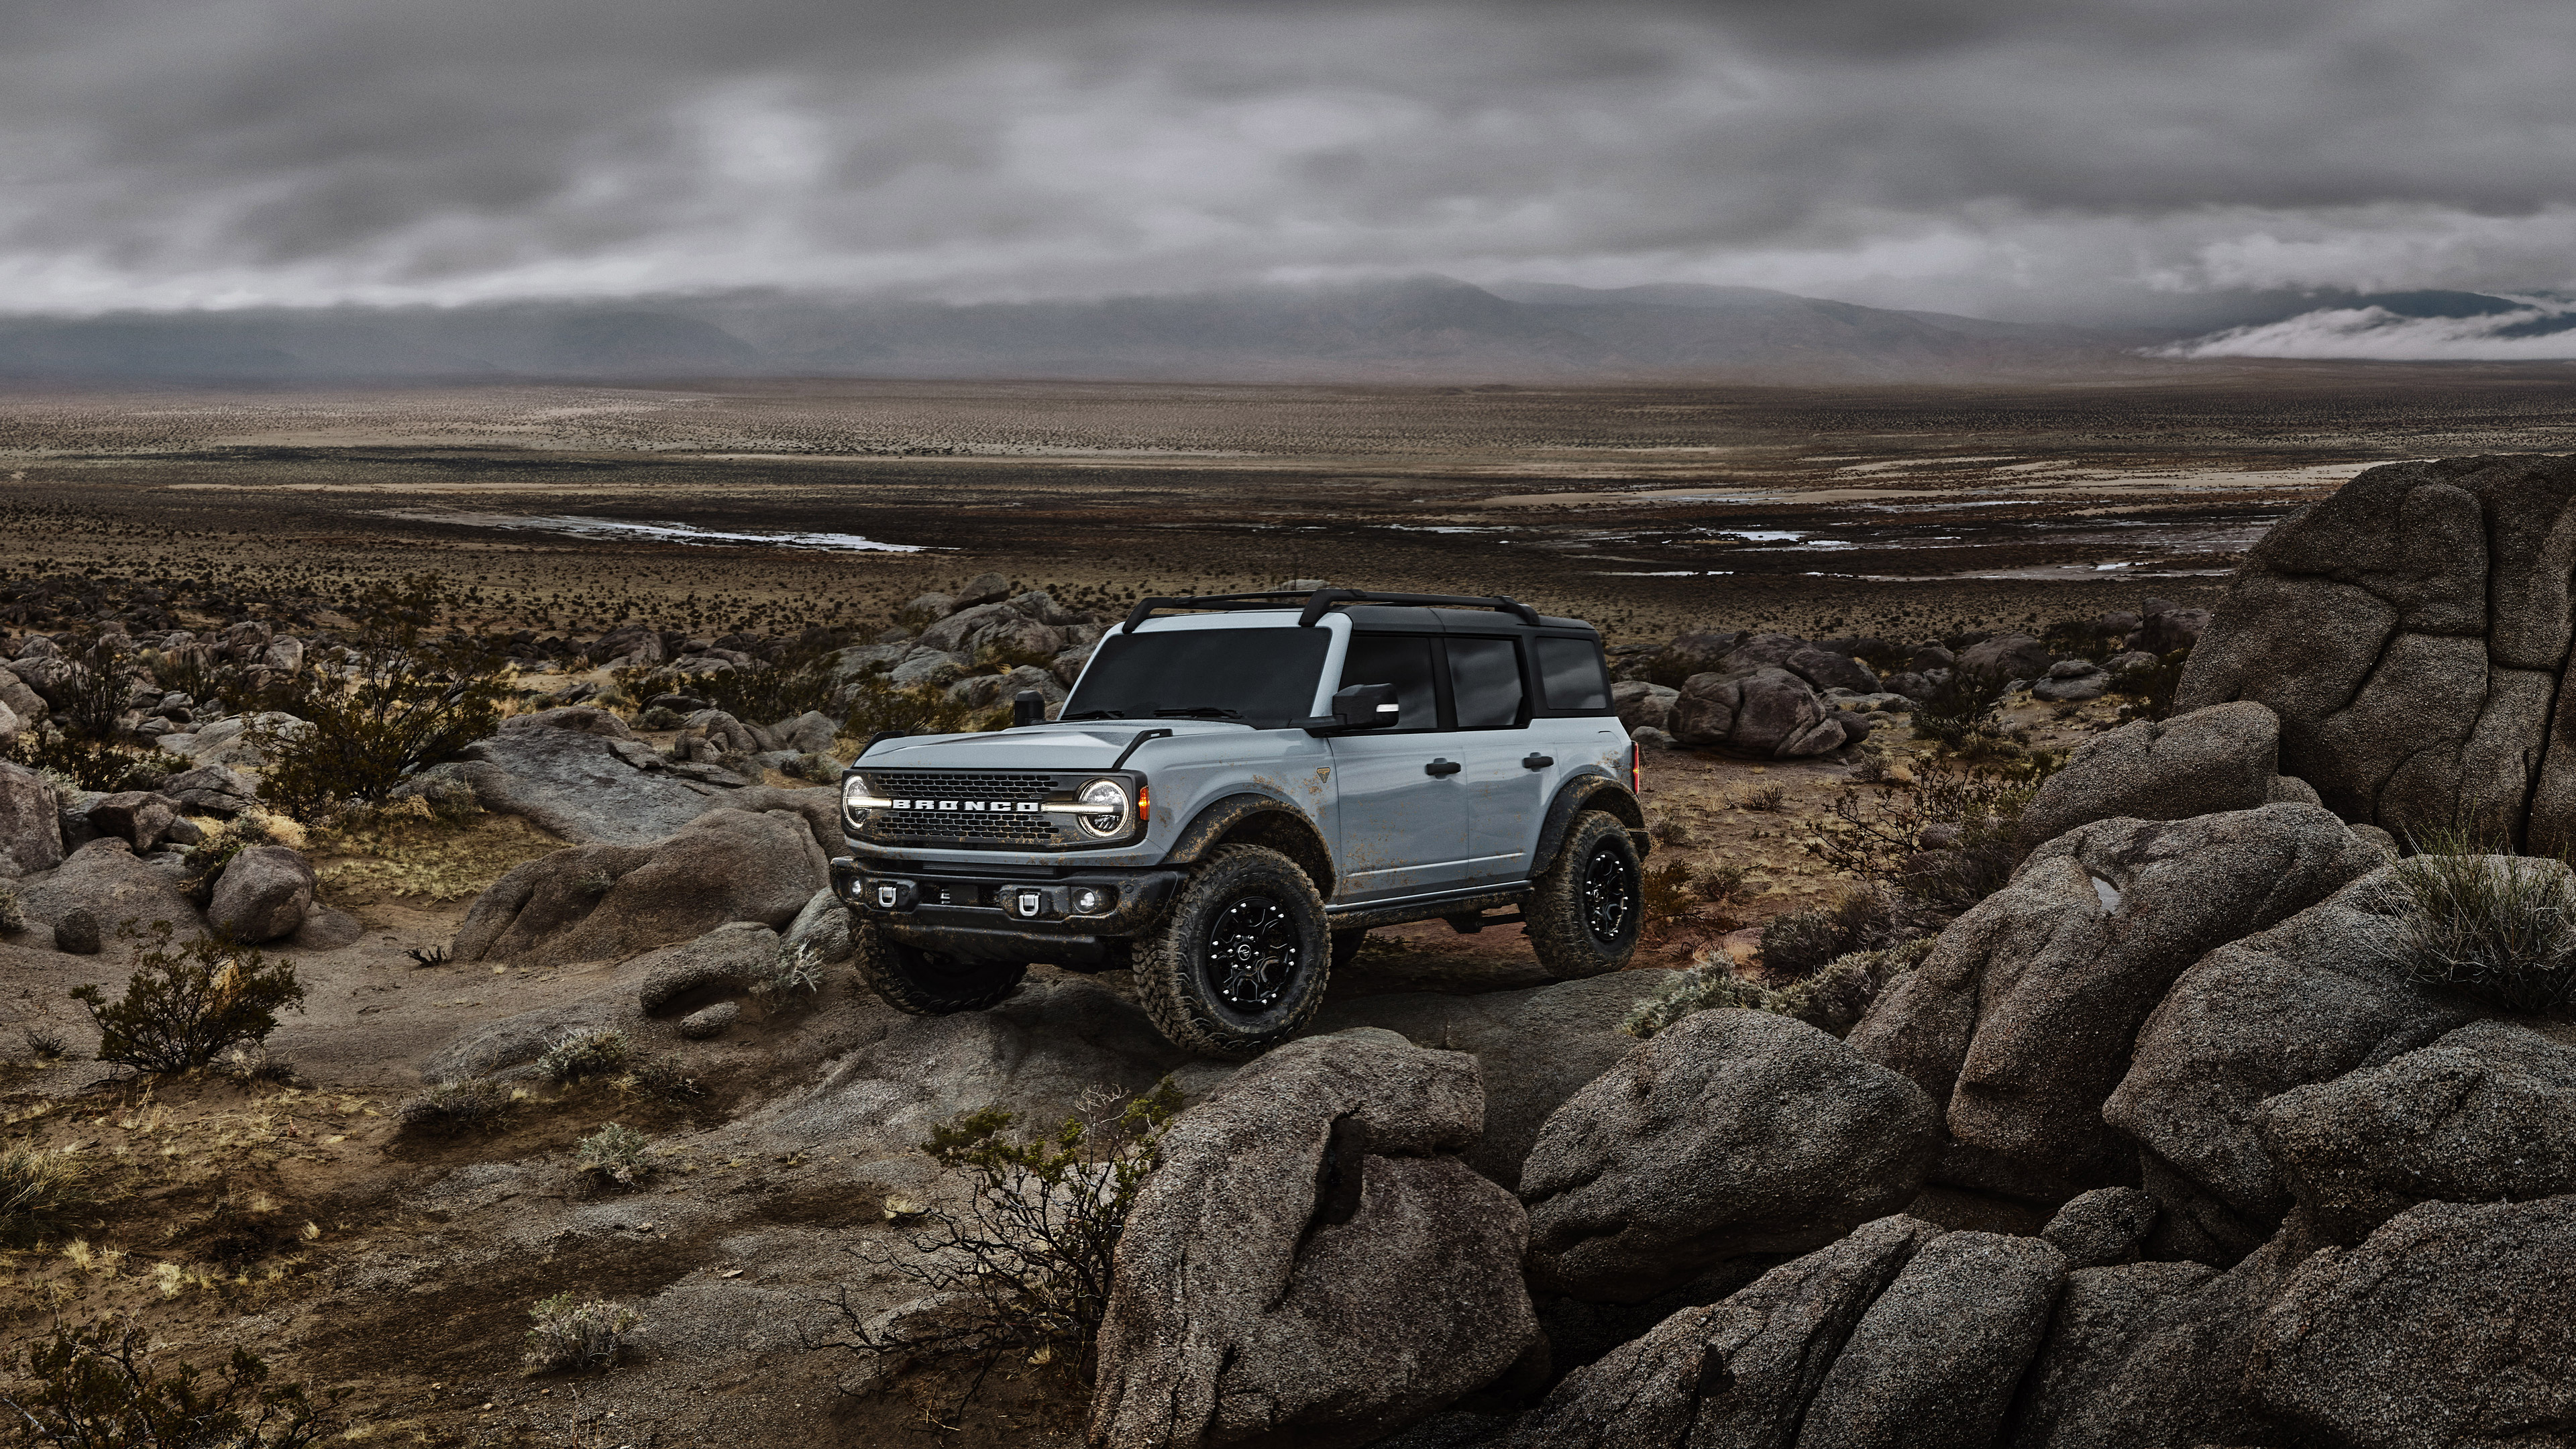 Ford Bronco: Ford Motor Company, Front-Engine, Four-Wheel-Drive, Sport Utility Vehicle, 2021. 3840x2160 4K Background.